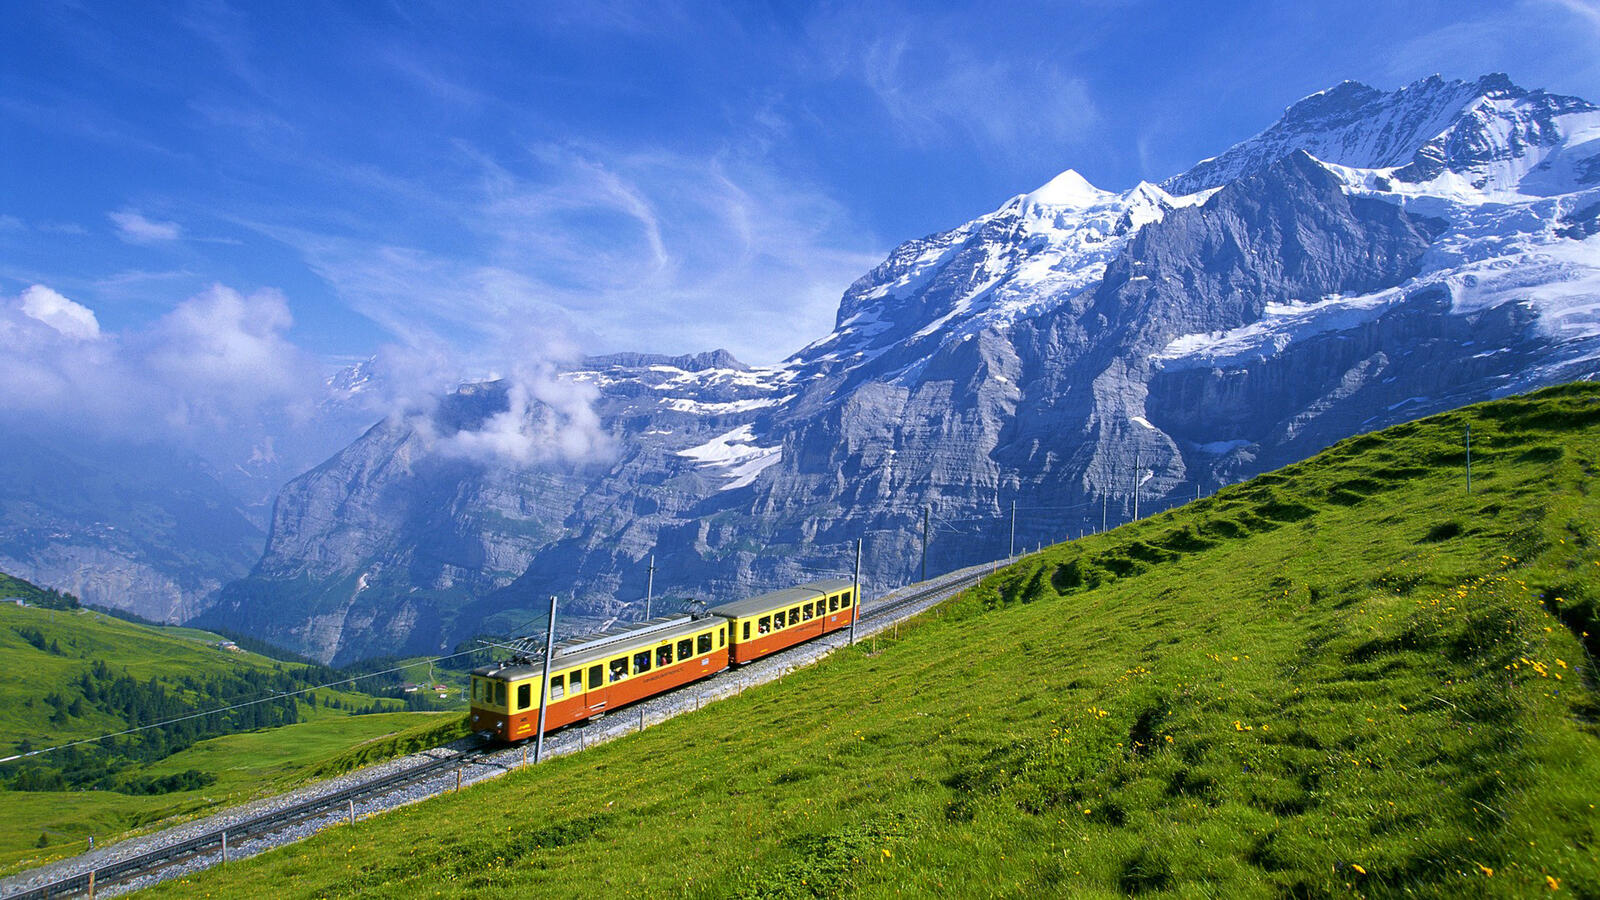 Wallpapers tram nature mountains on the desktop